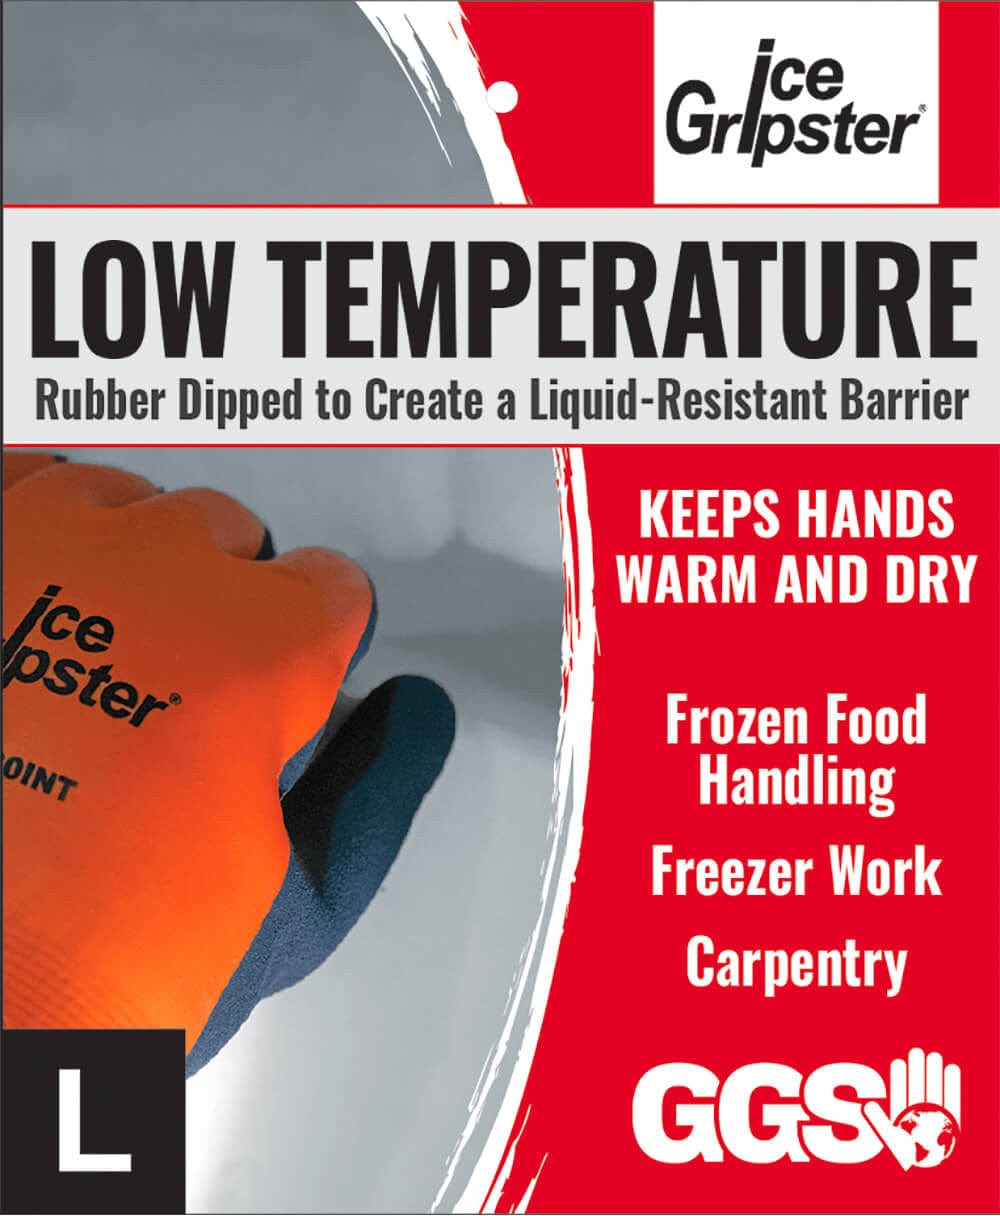 Global Glove 380INT Ice Gripster High-Visibility Water-Resistant Gloves GG-380INT - Package Information